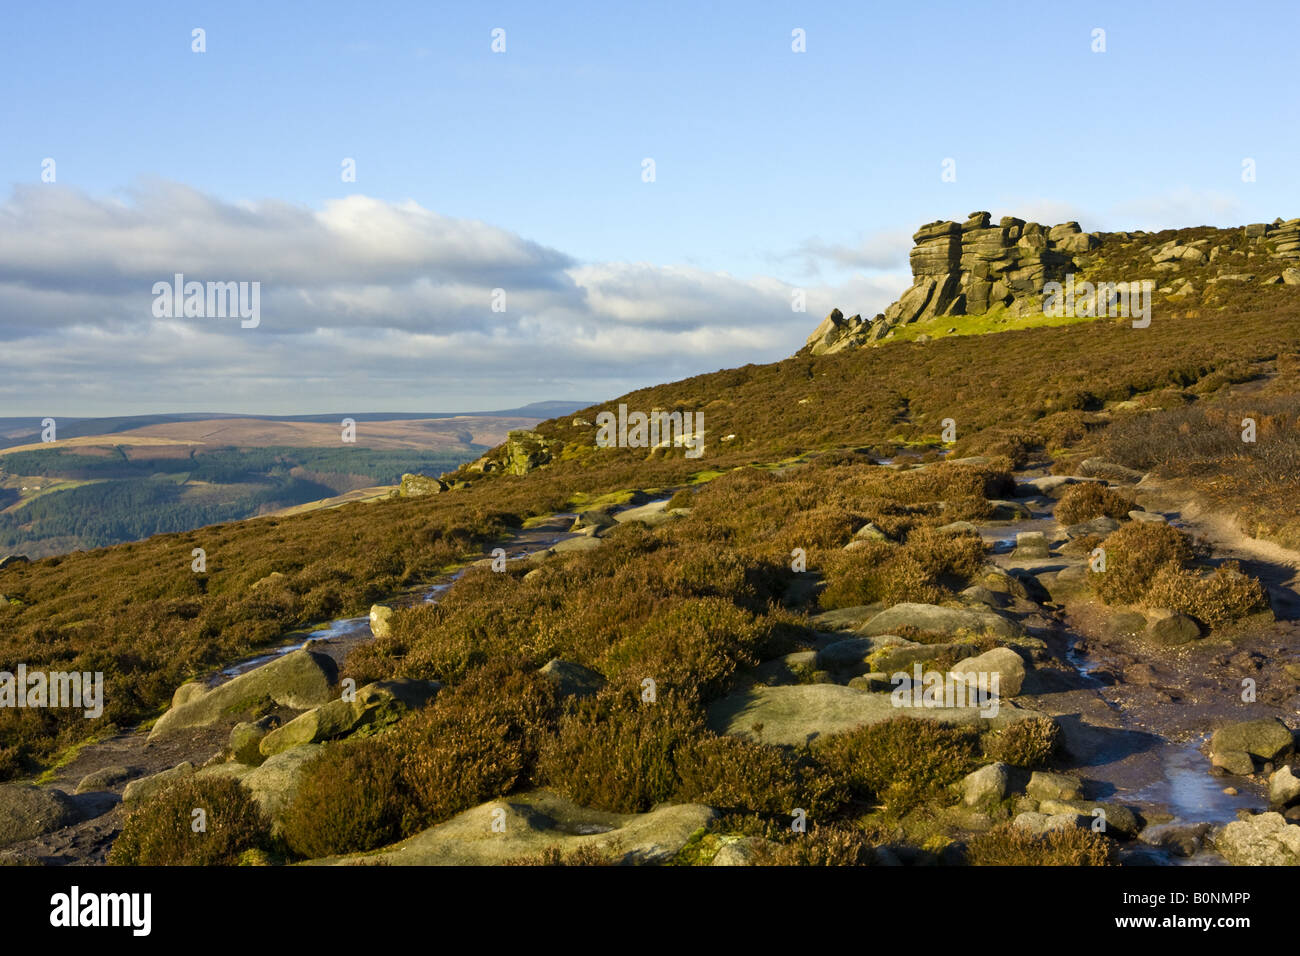 White Tor with surrounding hills and path in foreground. Located on hillside above Ladybower reservoir. Stock Photo